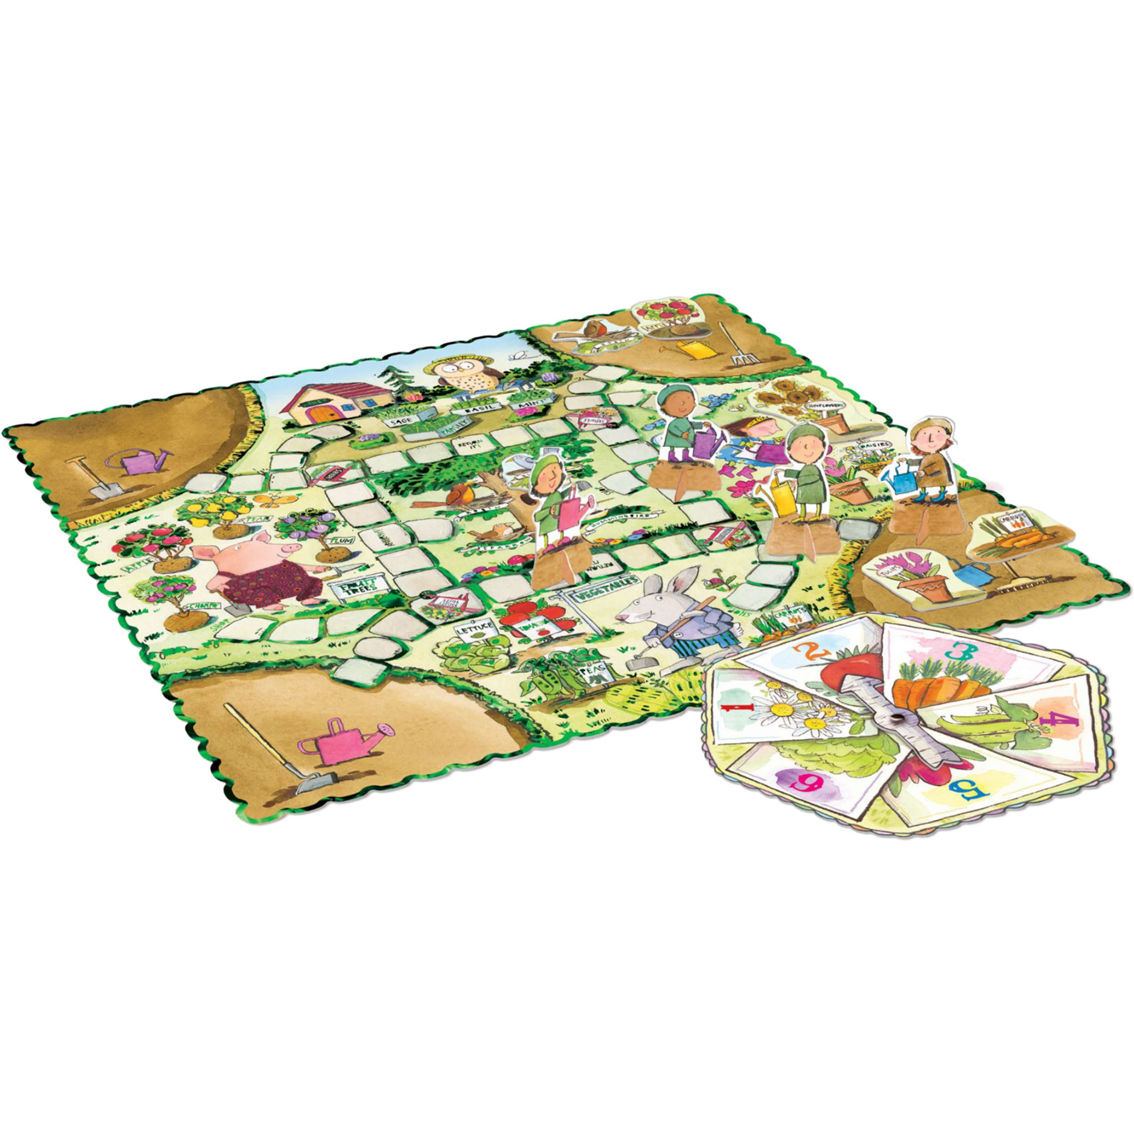 Gathering a Garden Foil Board Game - Image 3 of 4